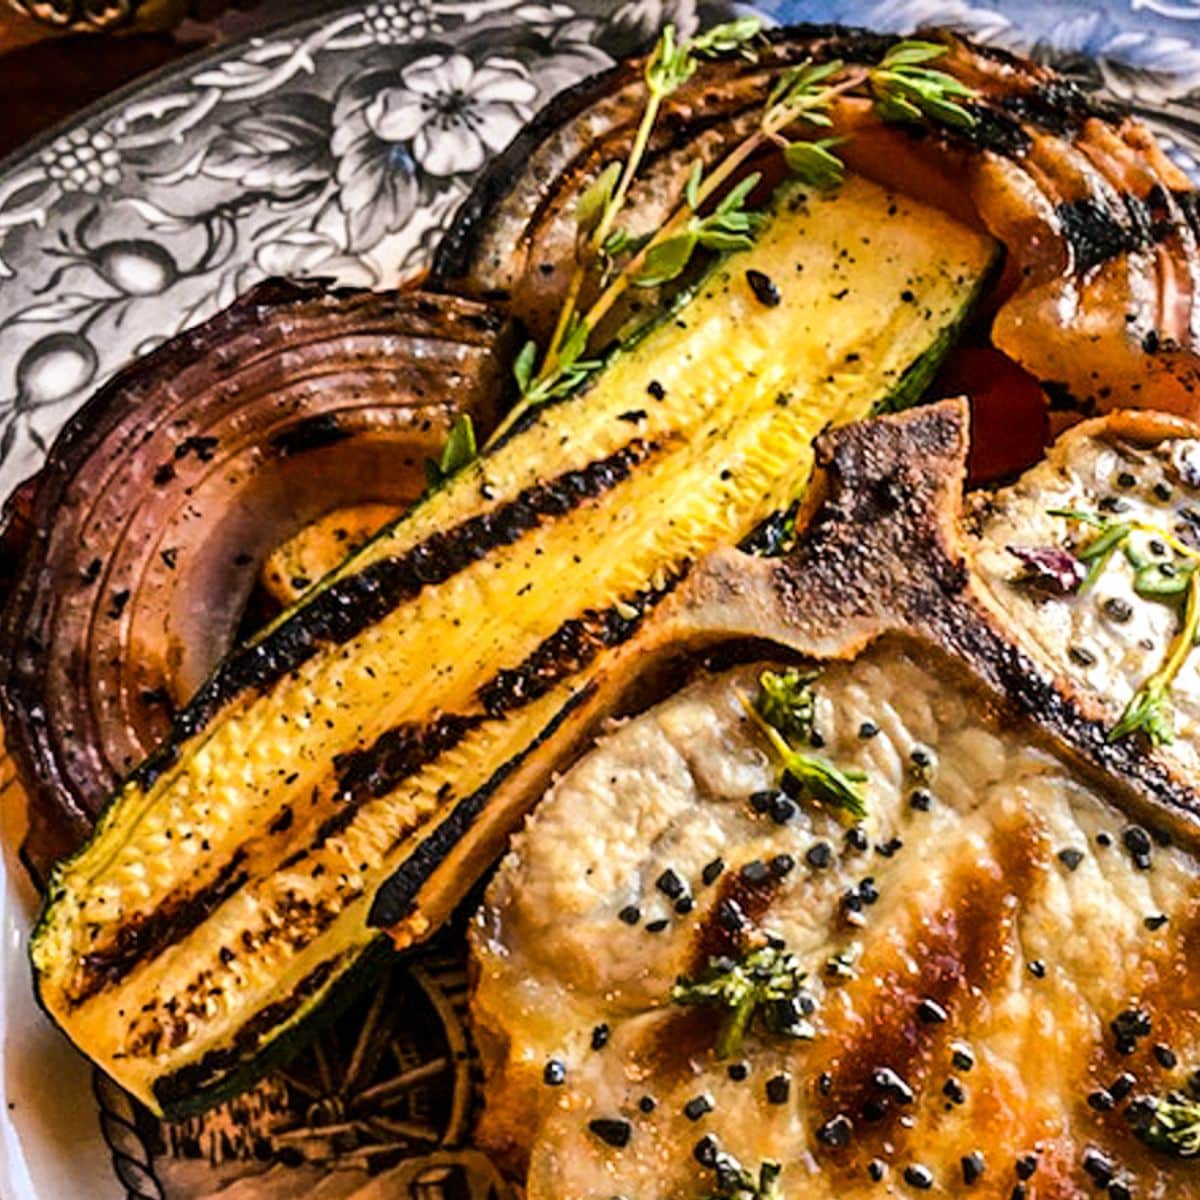 Grilled Vegetable Medley with Herb Butter